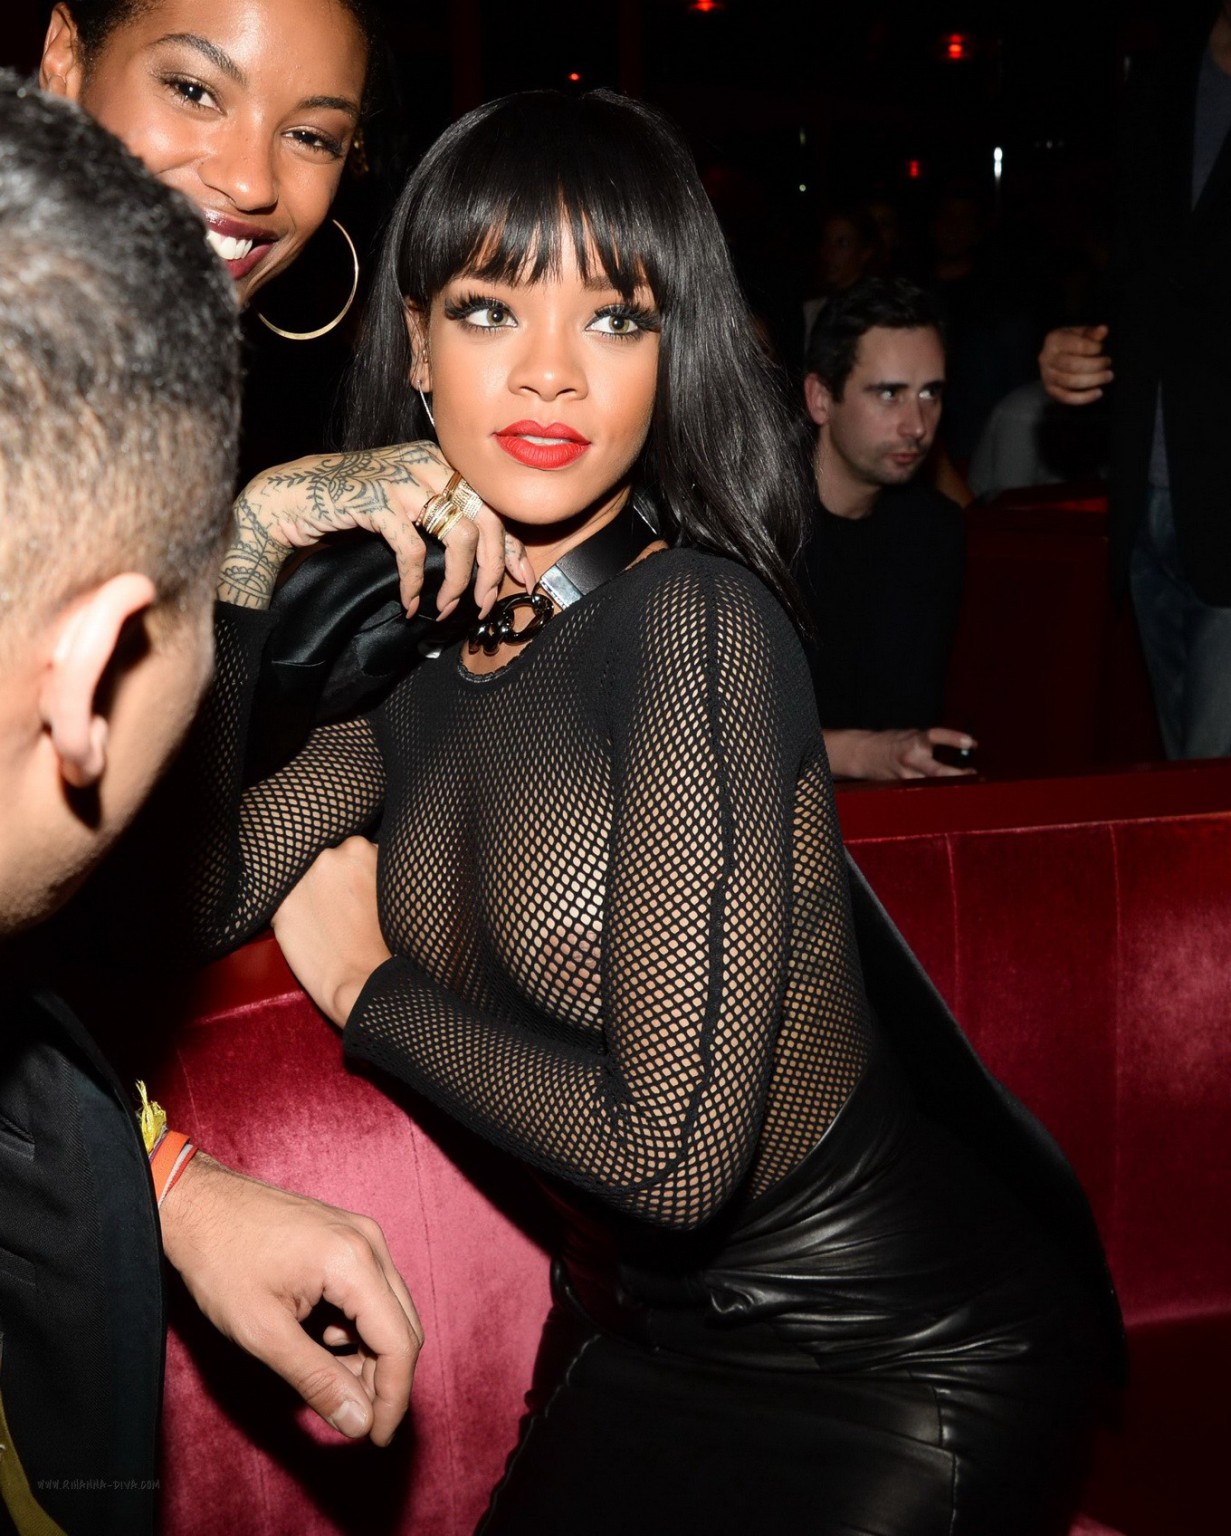 Rihanna braless wearing fishnet bodysuit and leather outfit at the Balmain Fashi #75203484